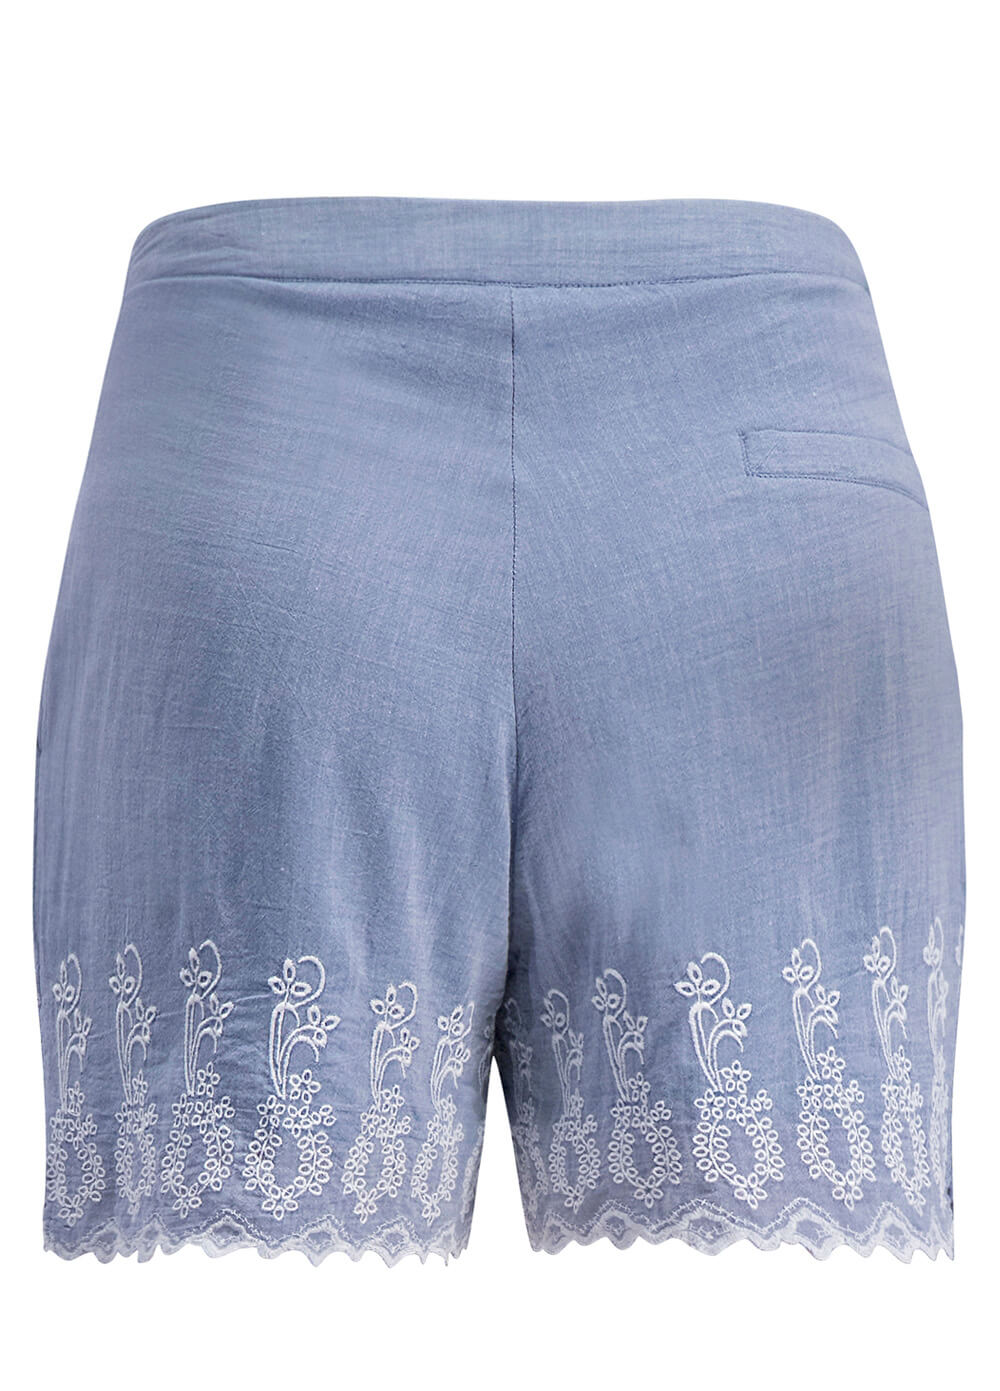 Embroidered Cotton Maternity Shorts in Blue by Esprit